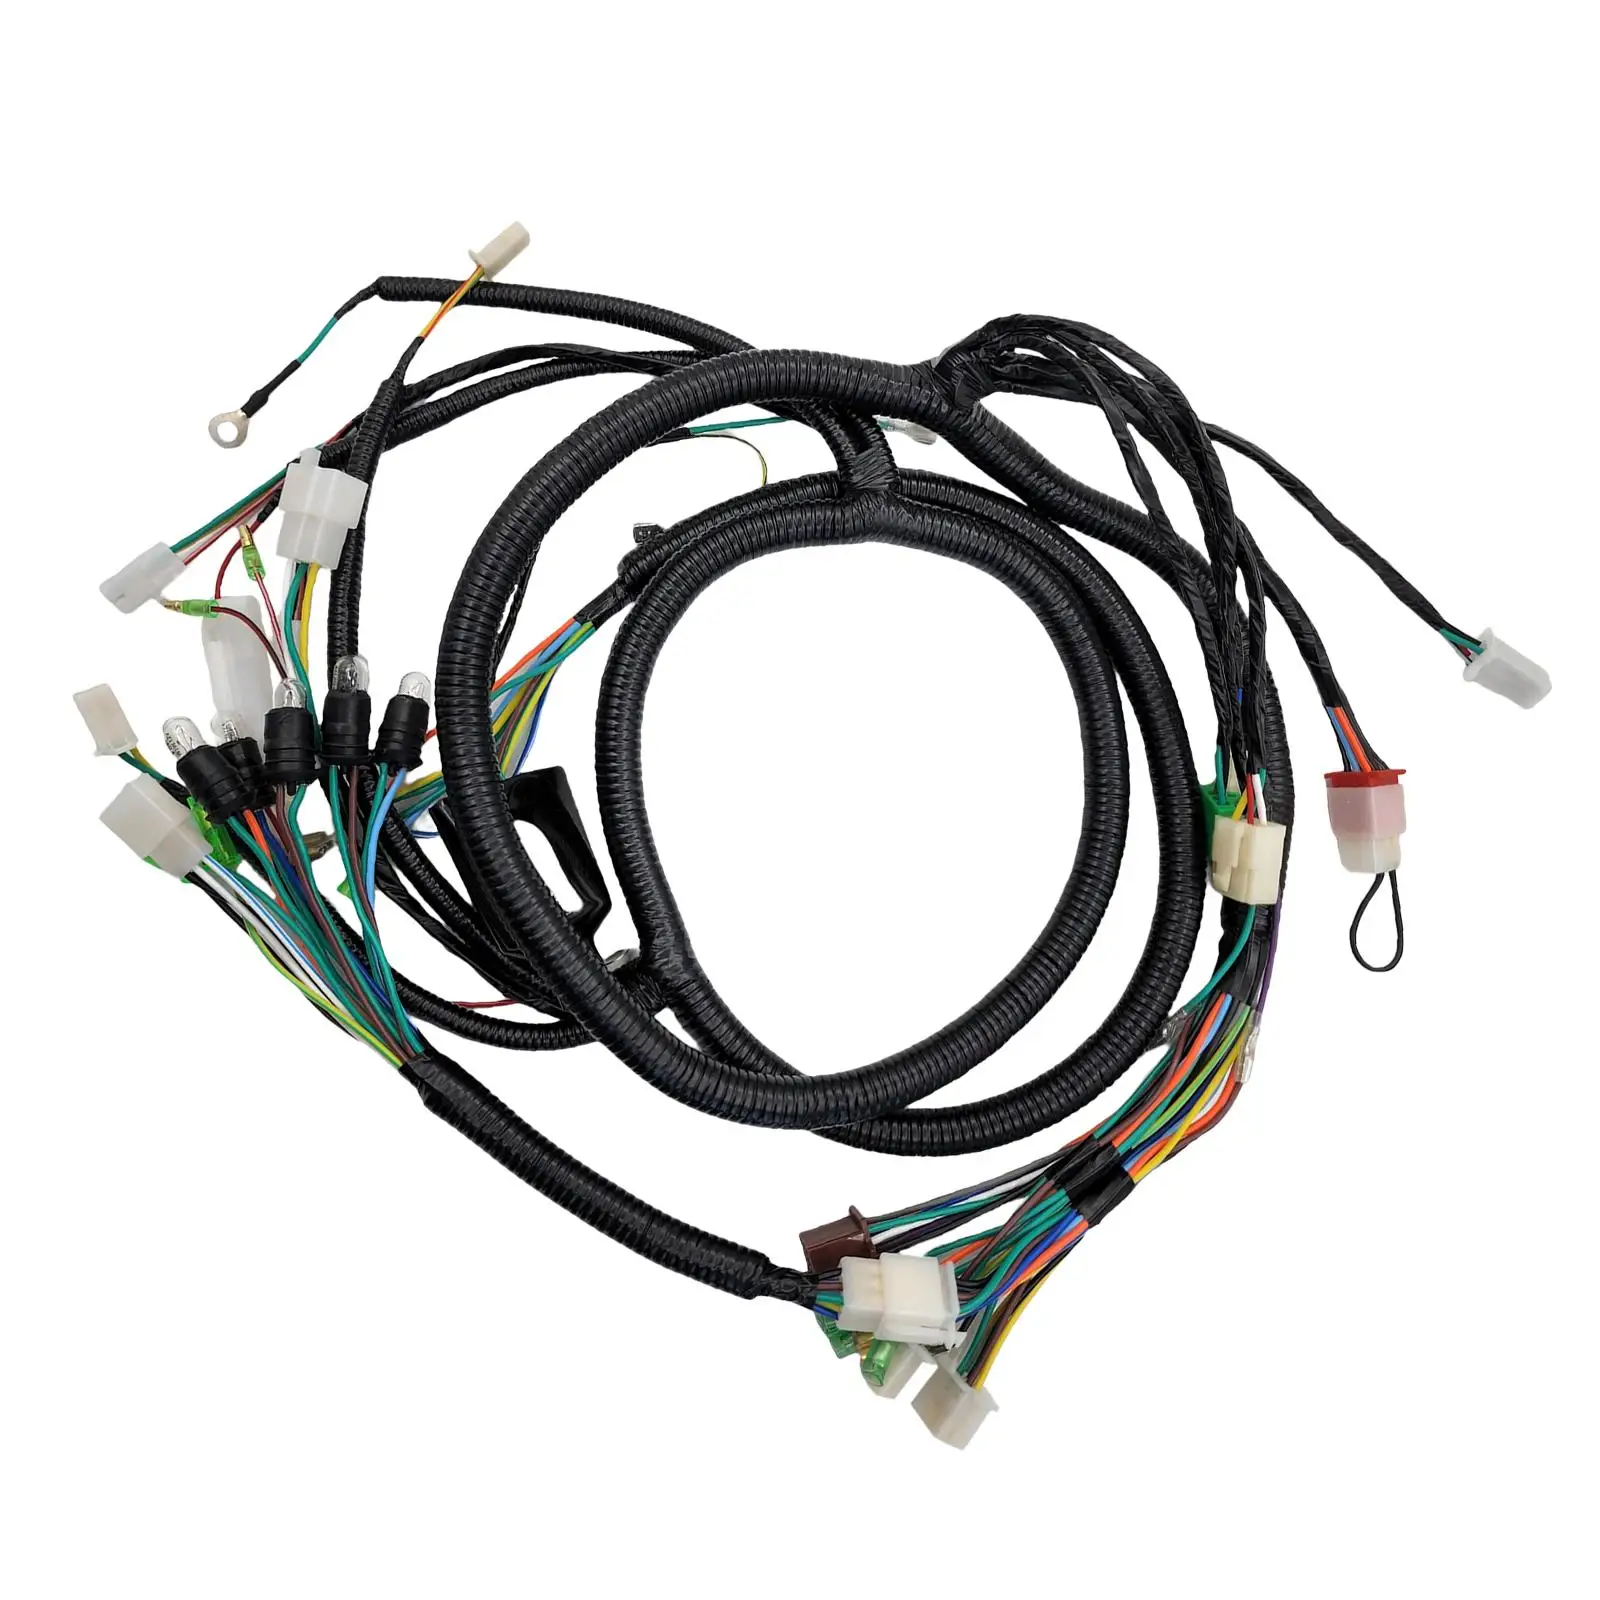 Replacement Harness Kits Replaces Spare Parts Wiring Harness